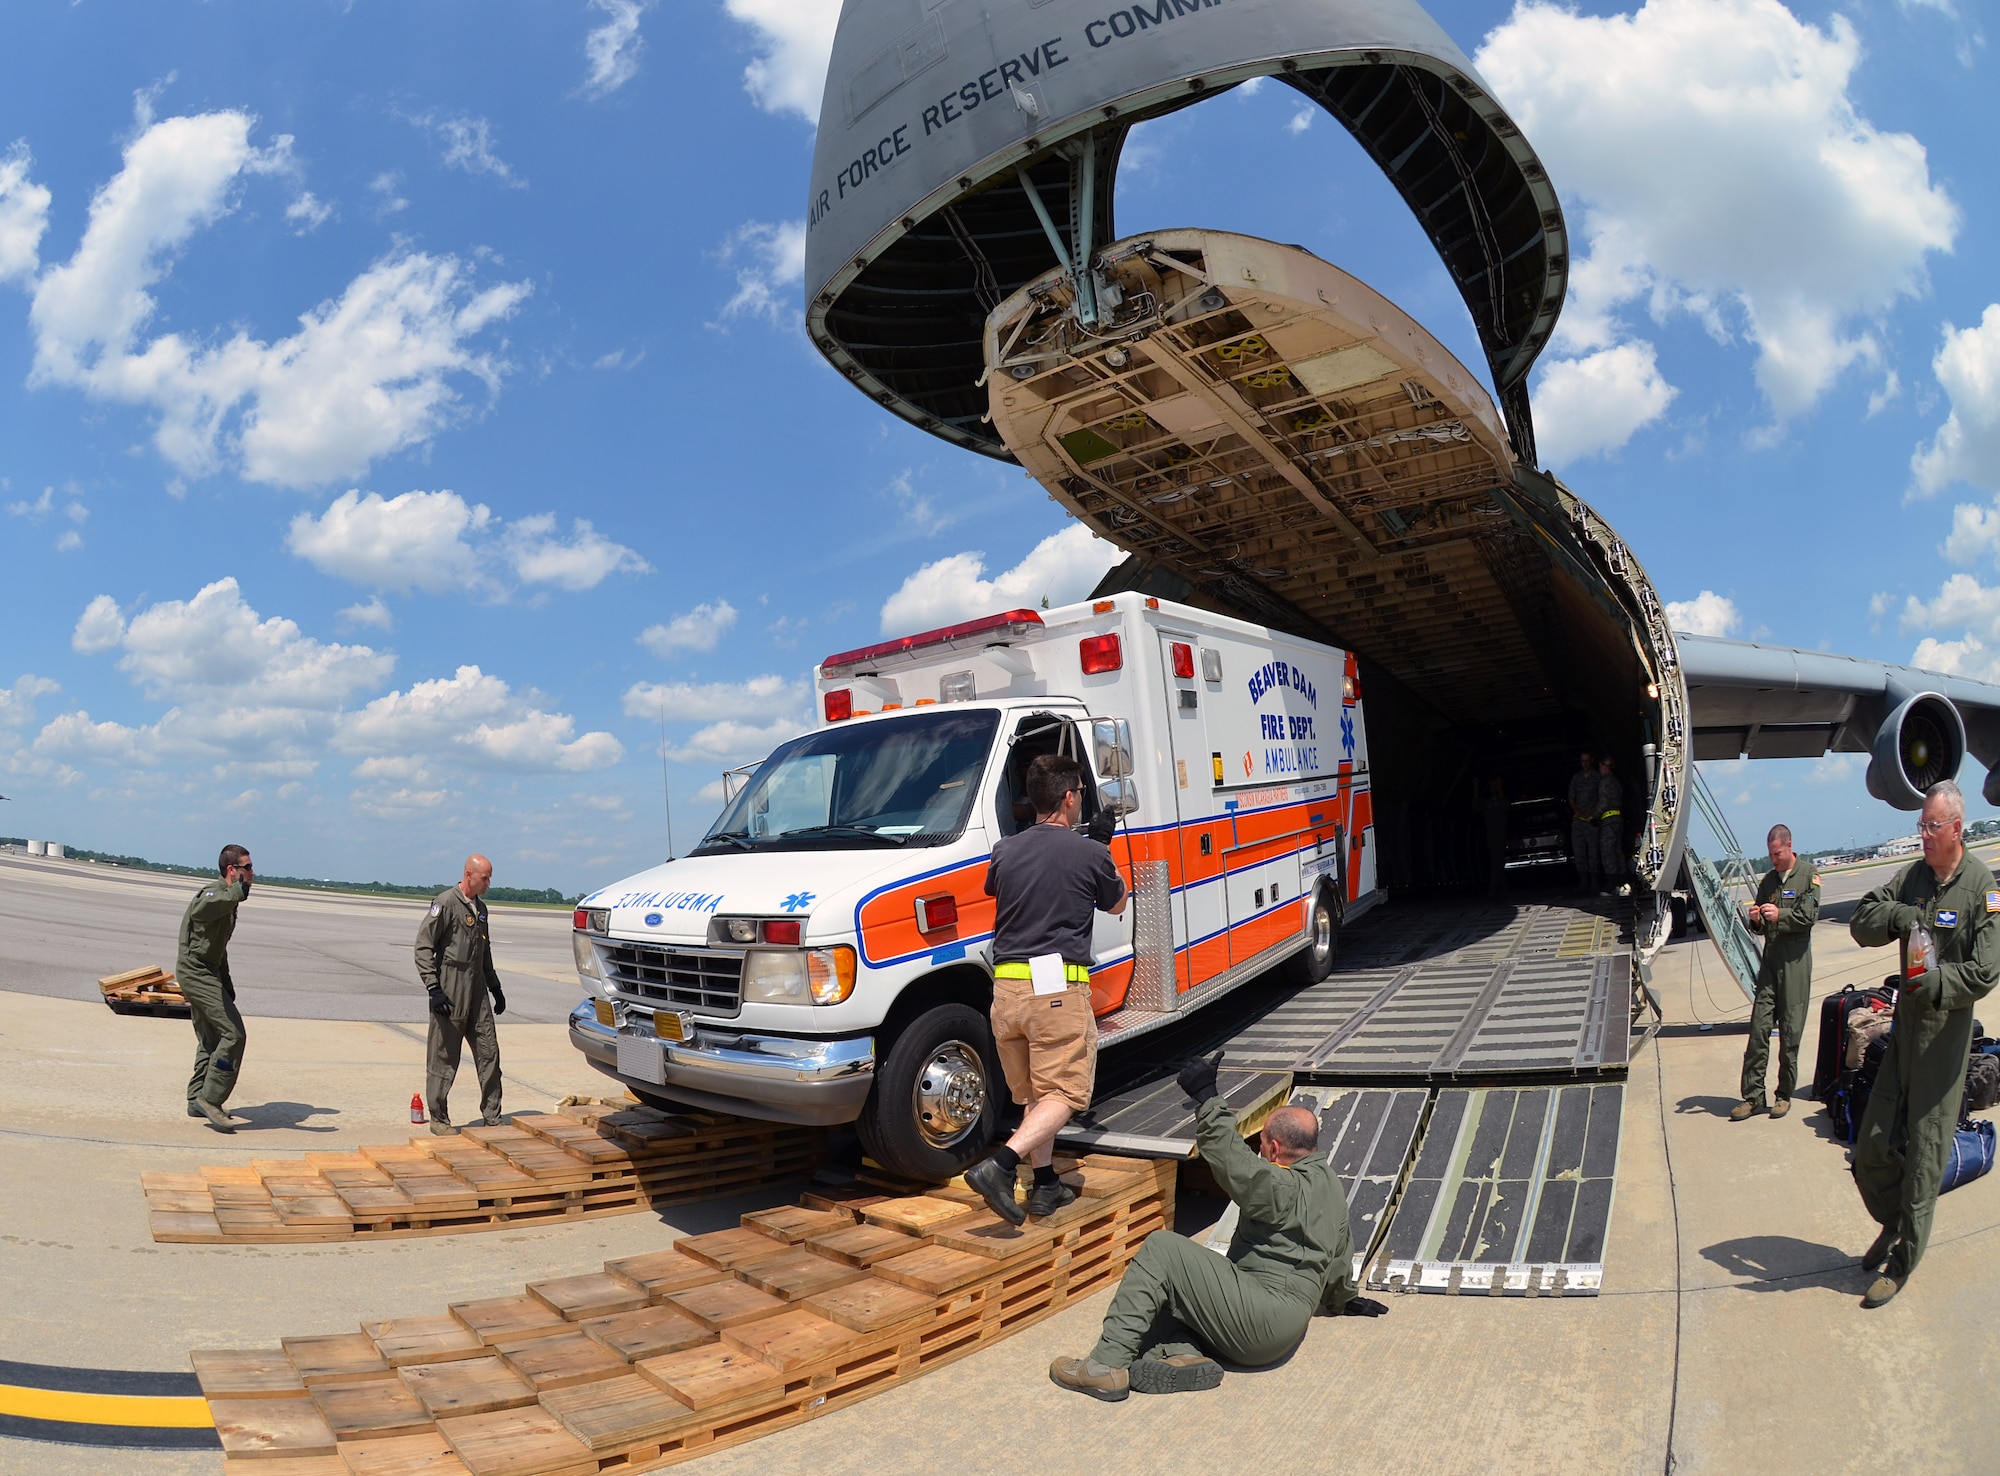 Airmen from the 337th Airlift Squadron load an ambulance and two fire trucks onto a C-5 Galaxy, June 9, 2014, on Joint Base Charleston, S.C., June 9, 2014. This Denton Amendment mission delivered the vehicles to Managua, Nicaragua on behalf of the Wisconsin/Nicaragua Partners of the Americas Inc. (U.S. Air Force photo/Staff Sgt. Kelly Goonan)